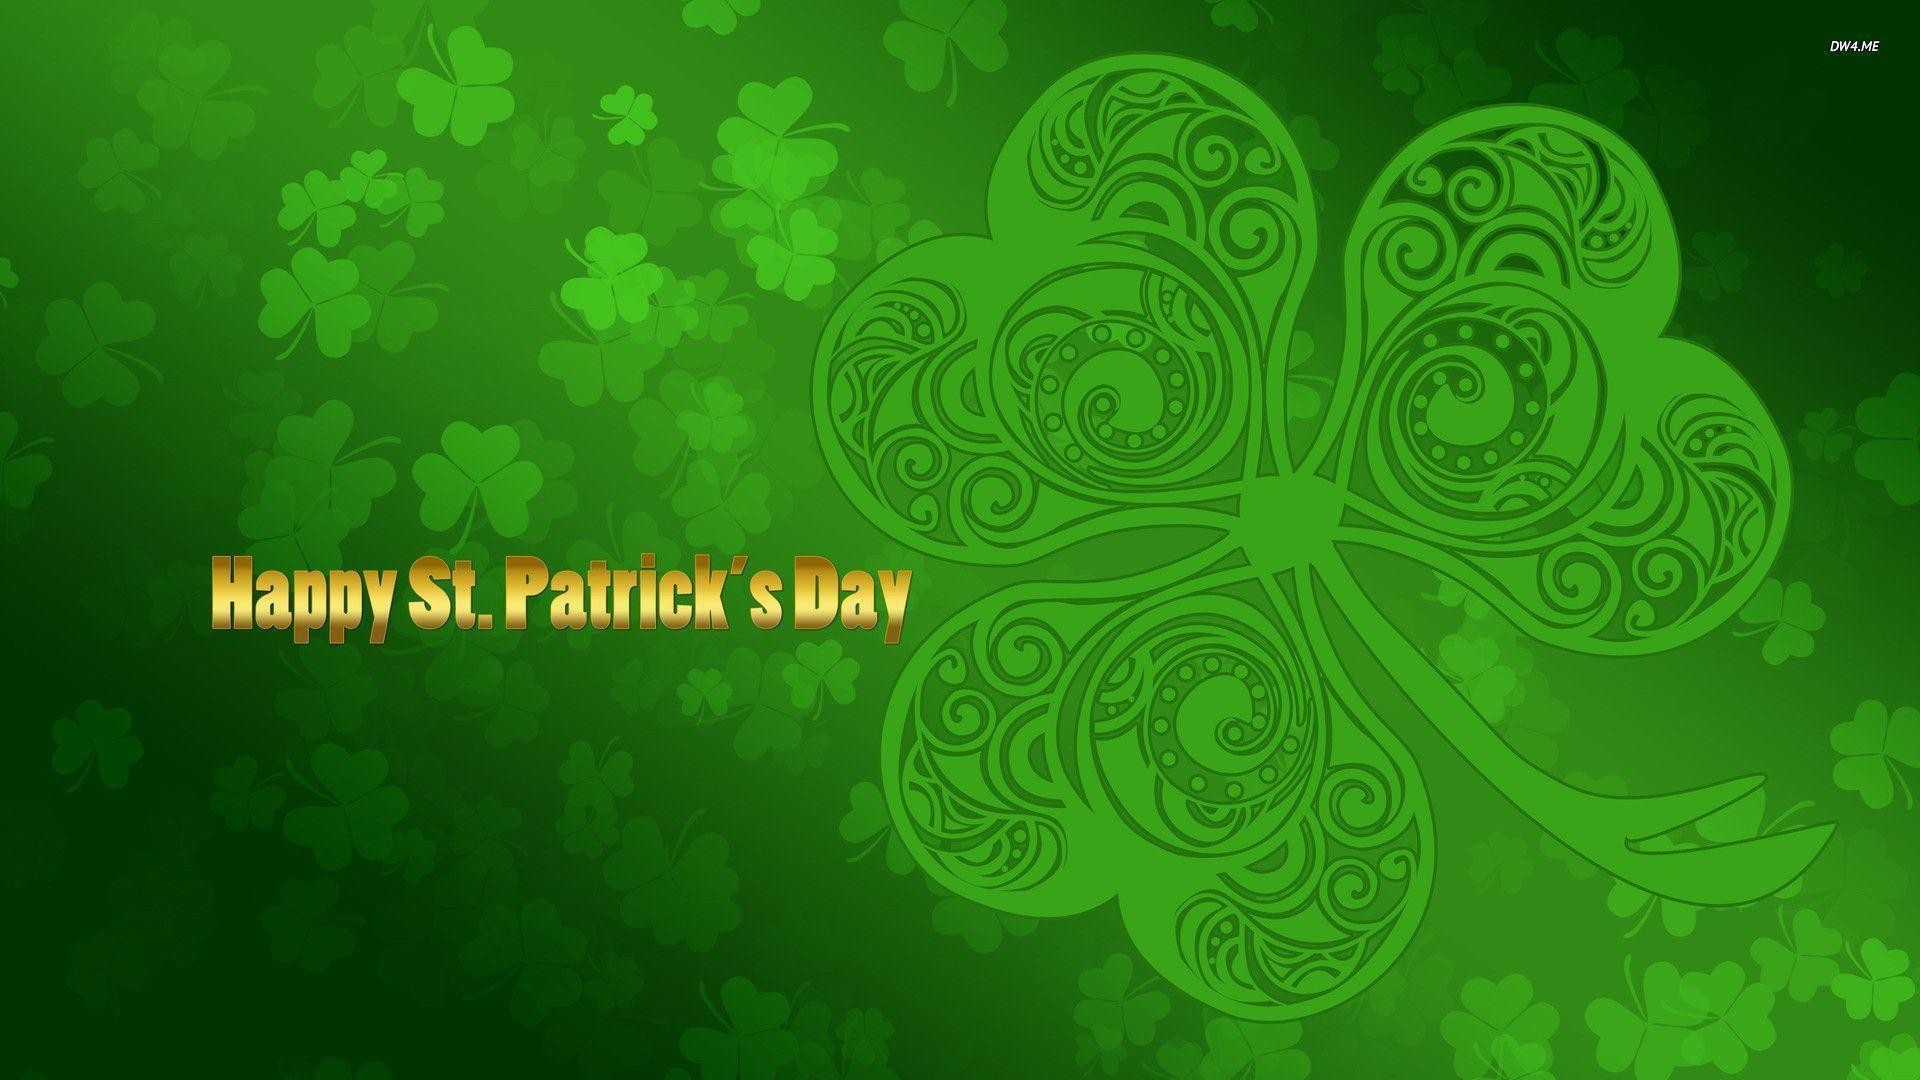 1920x1080 Happy Saint Patrick's Day wallpaper - Holiday wallpapers - #